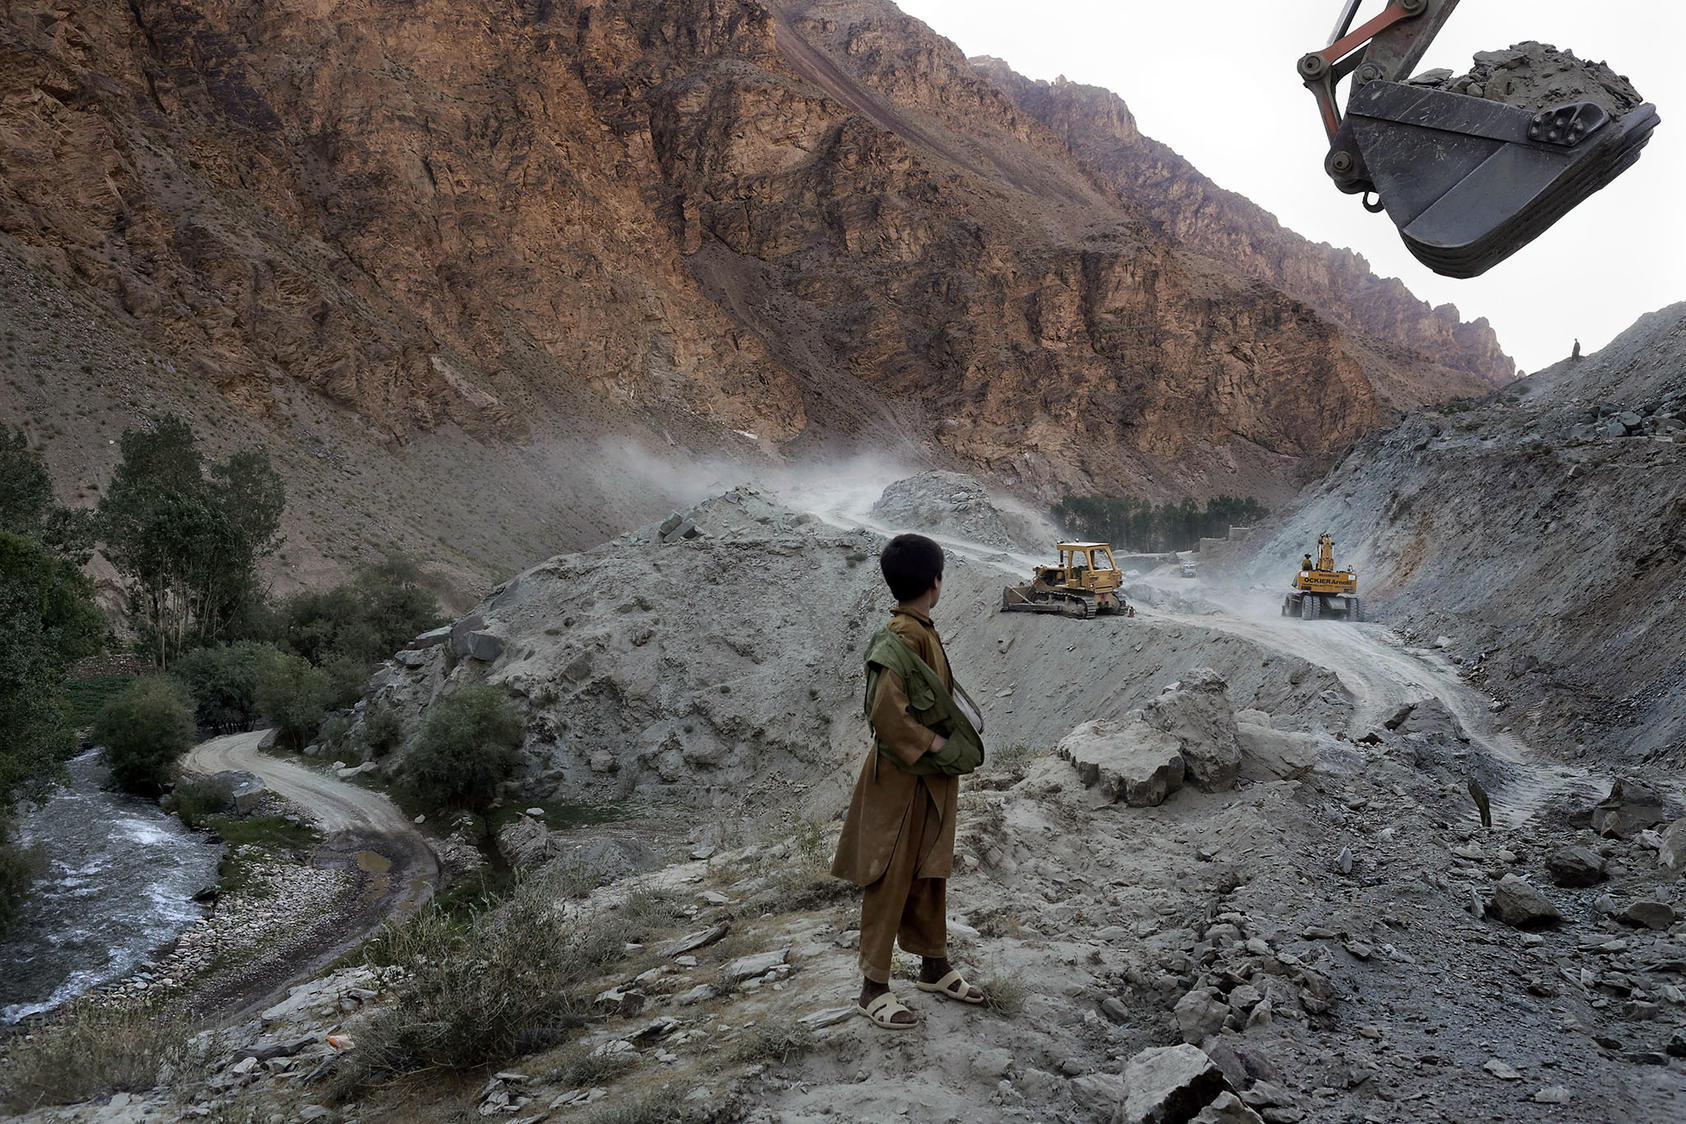 Above road construction near an iron ore mine near Bamiyan, Afghanistan, July 4, 2012. The country’s lack of infrastructure has hindered efforts to exploit its natural resources. (Mauricio Lima/The New York Times)